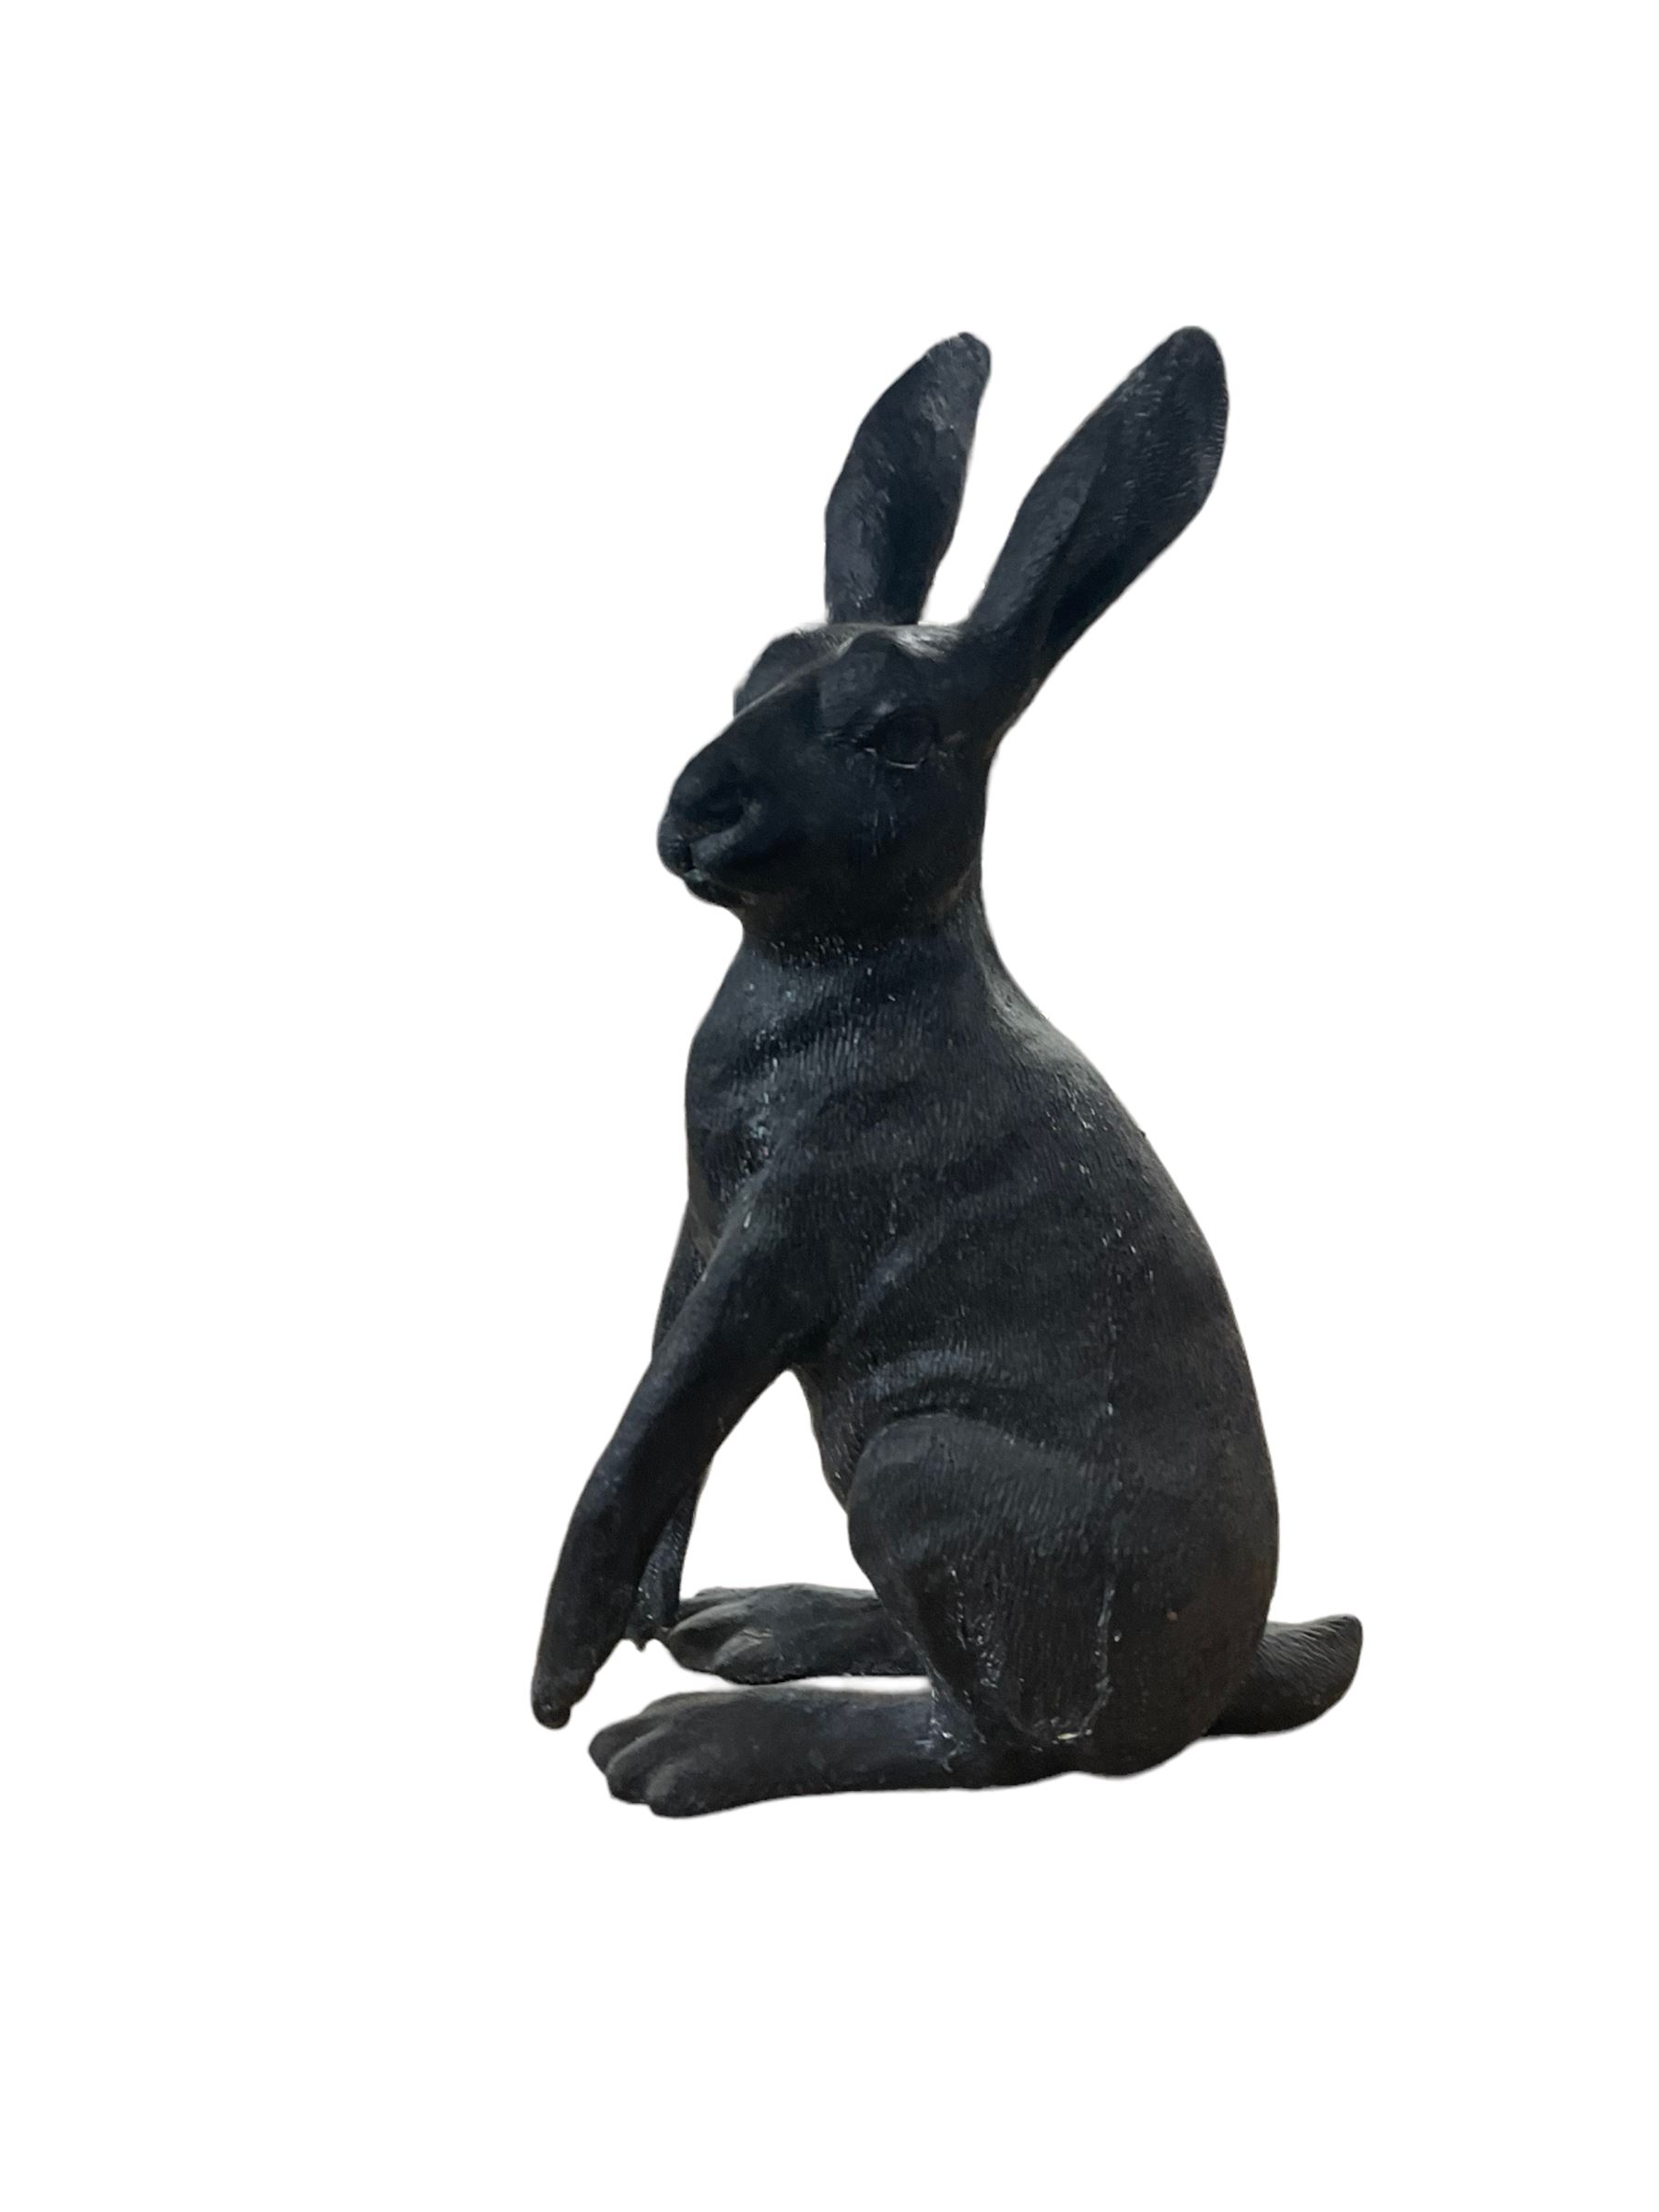 Large composite hare figures - Image 3 of 5